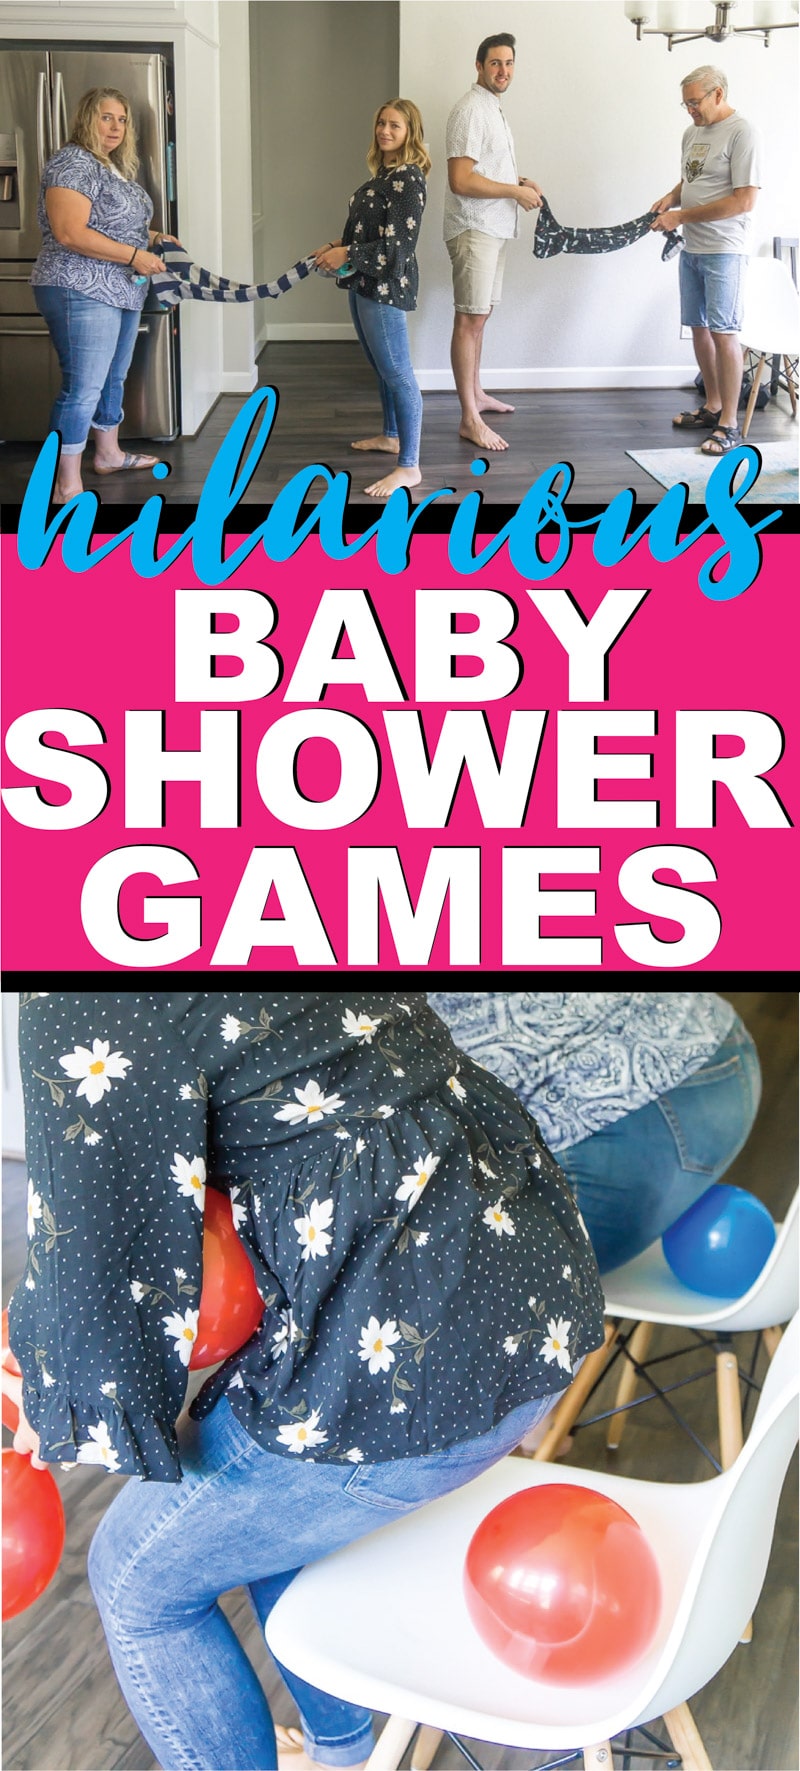 20-best-ever-baby-shower-games-play-party-plan